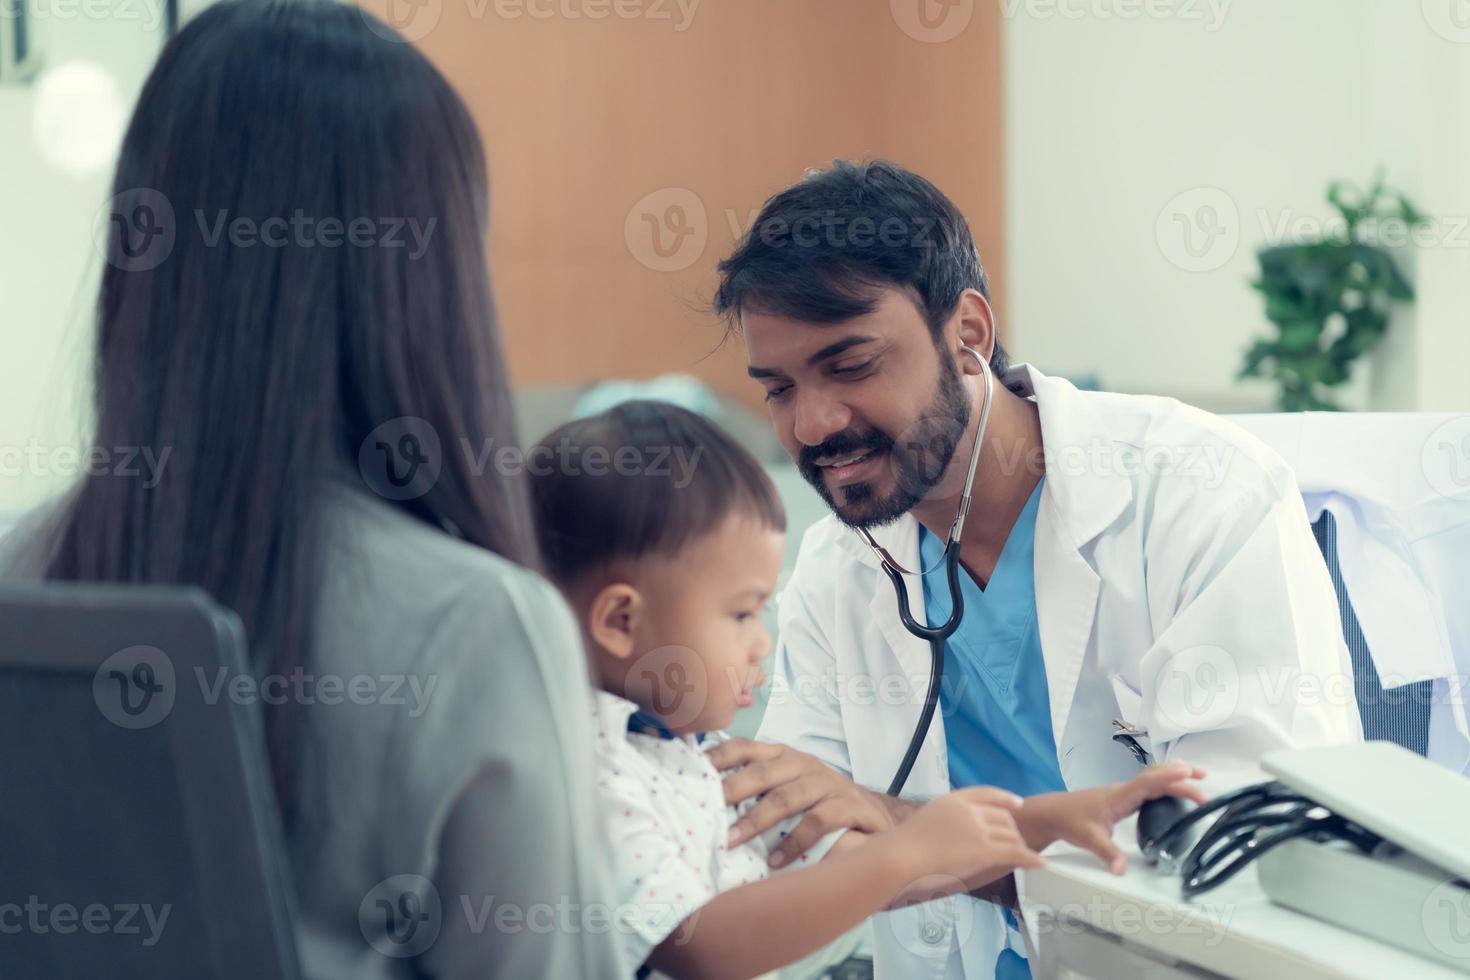 The pediatrician must try to play with the child. which parents brought to check the body to make it easier to examine the child photo